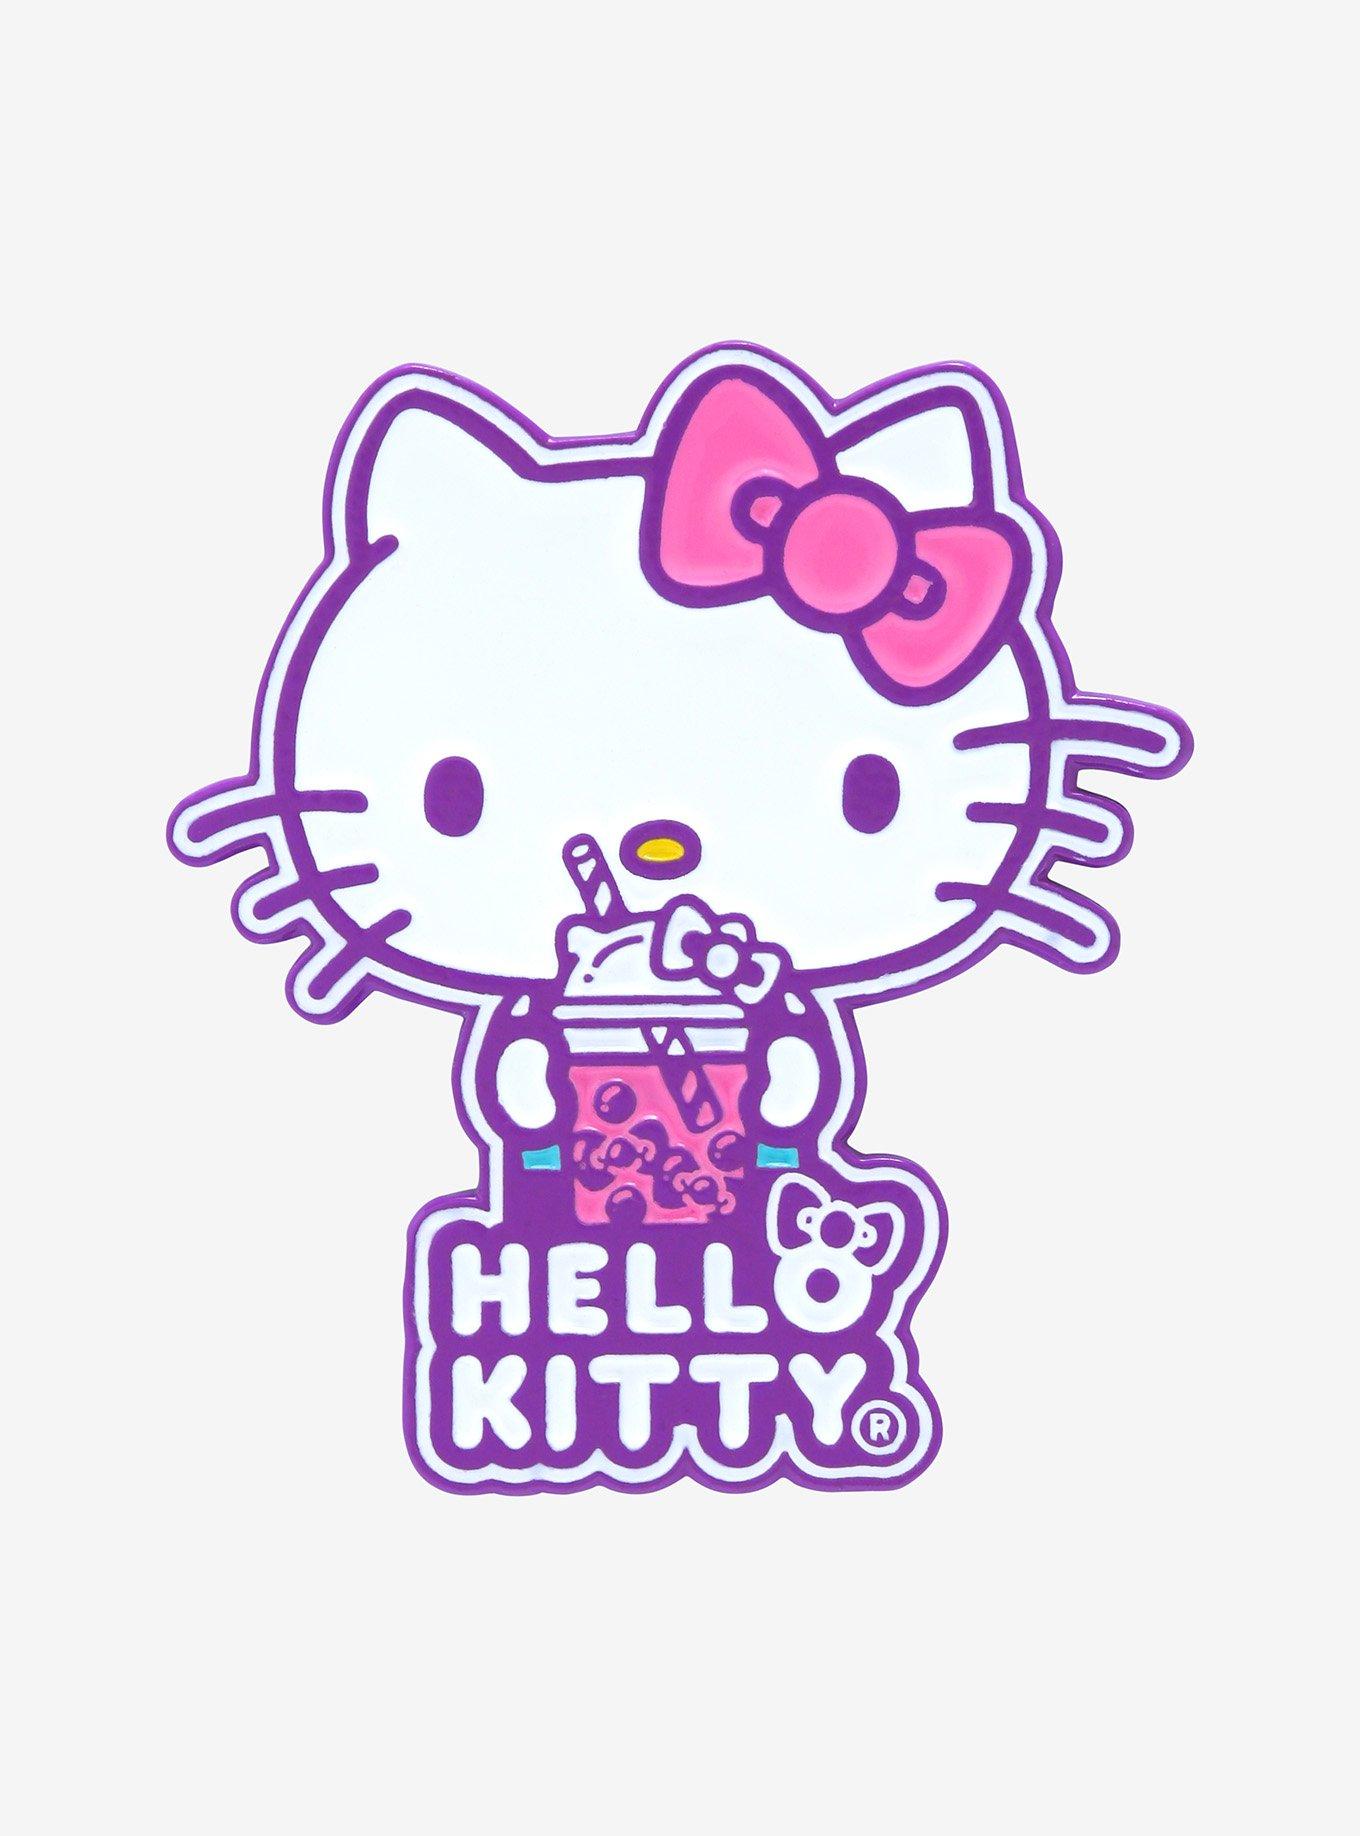 ♡ Be Positive ♡ — HELLO KITTY WALLPAPERS